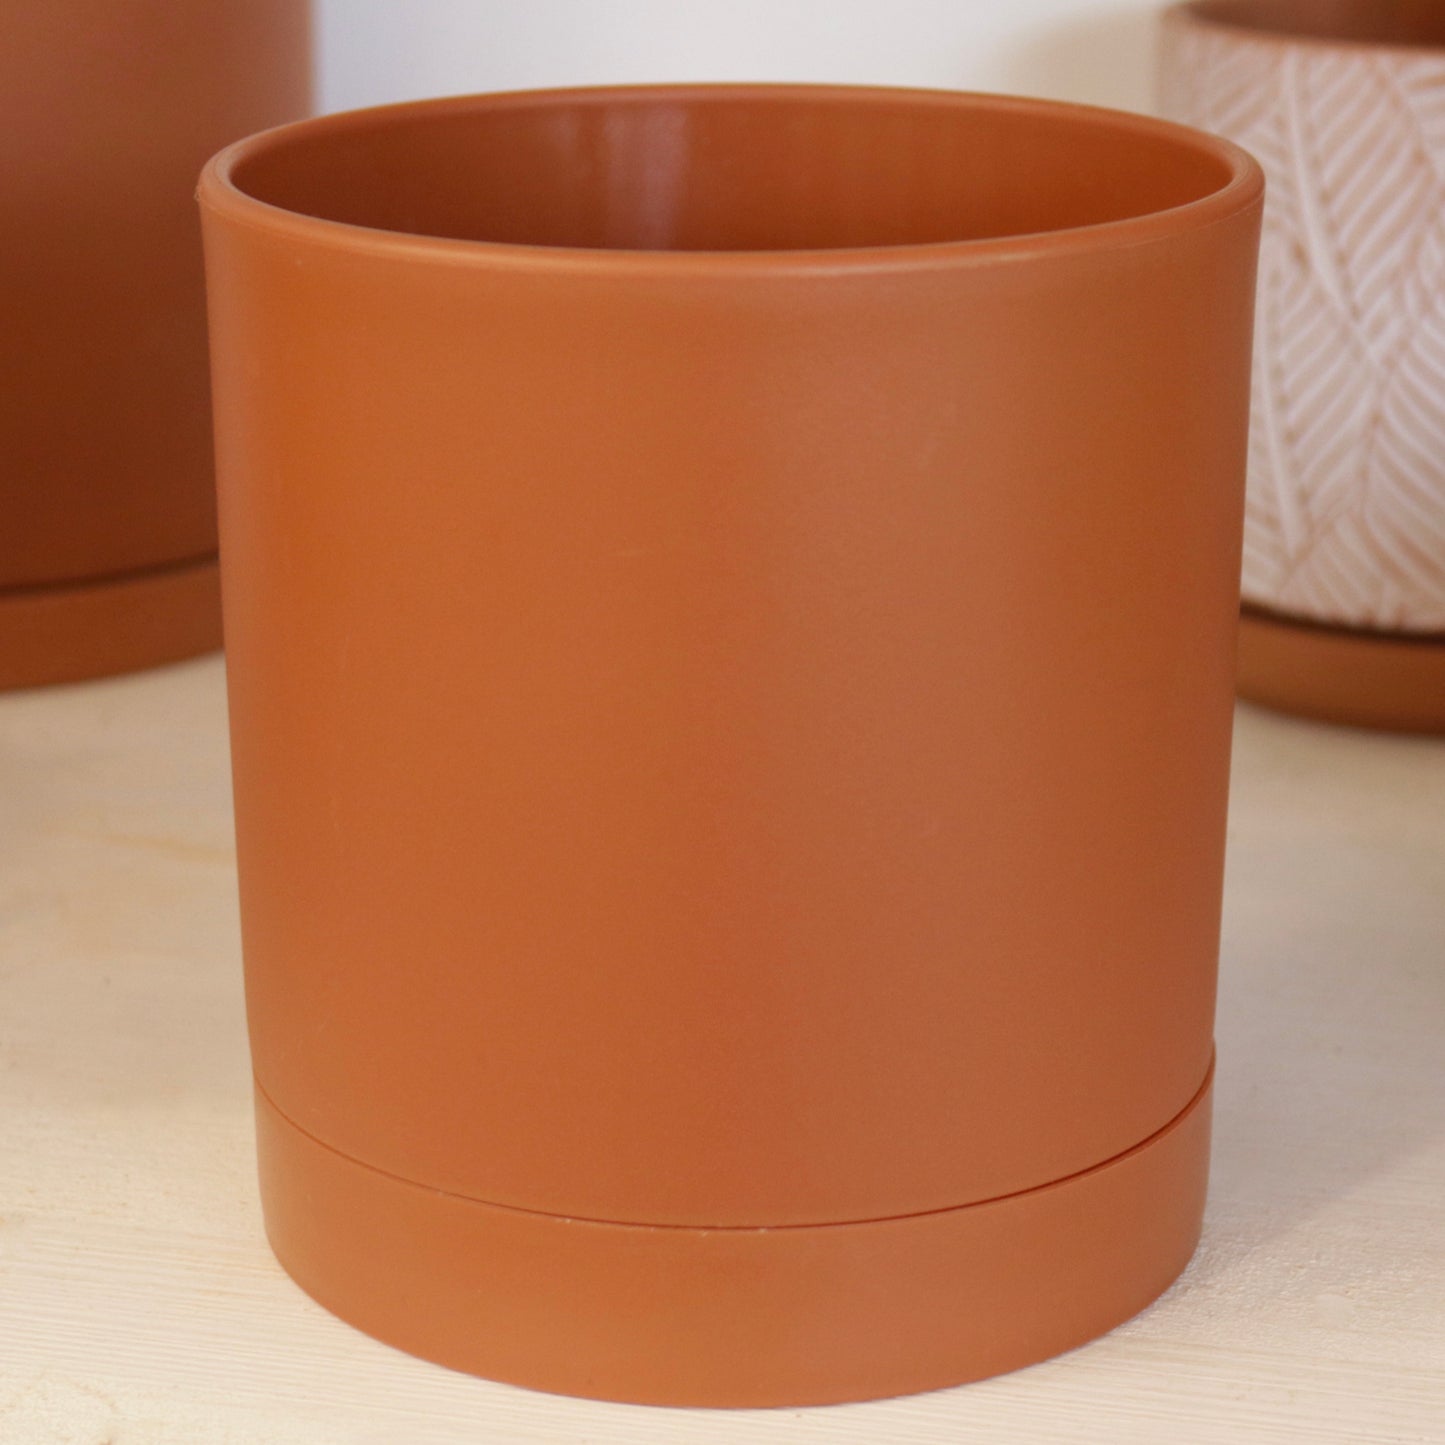 Plastic Terracotta Planter with Saucer